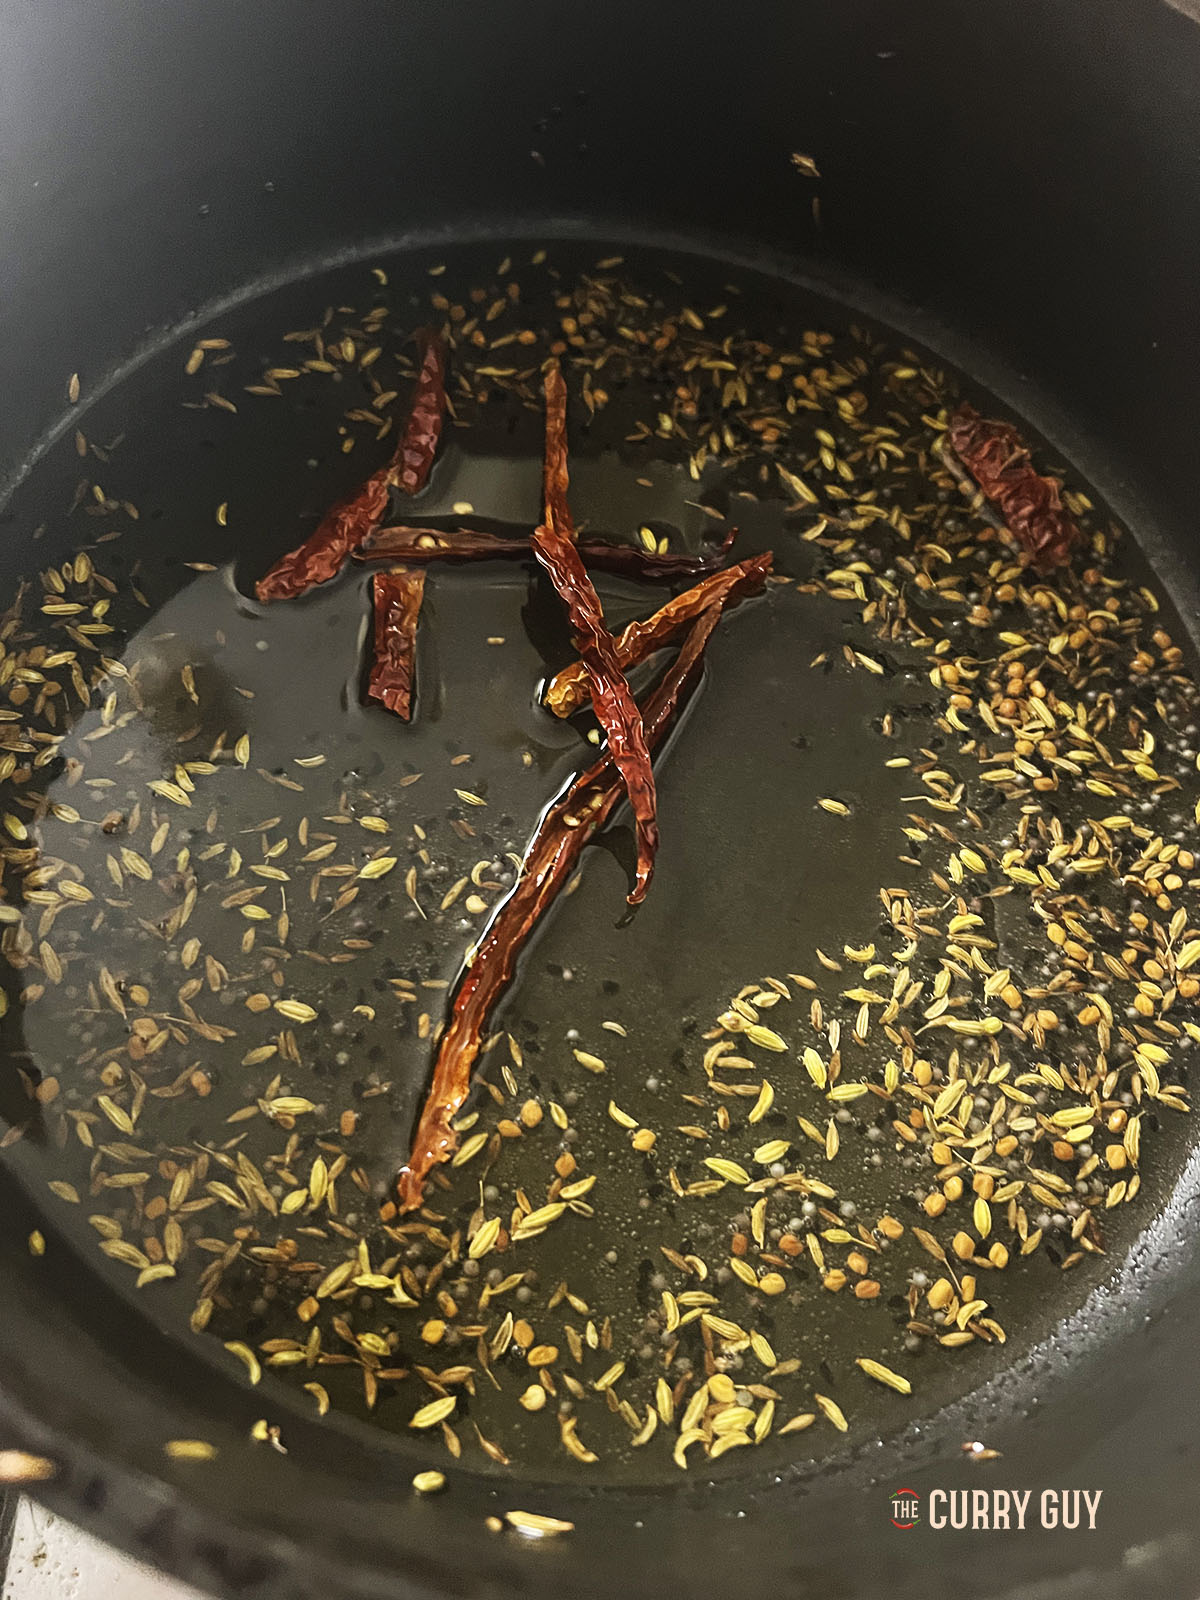 Tempering the spices and dried chillies in the oil in the pan.